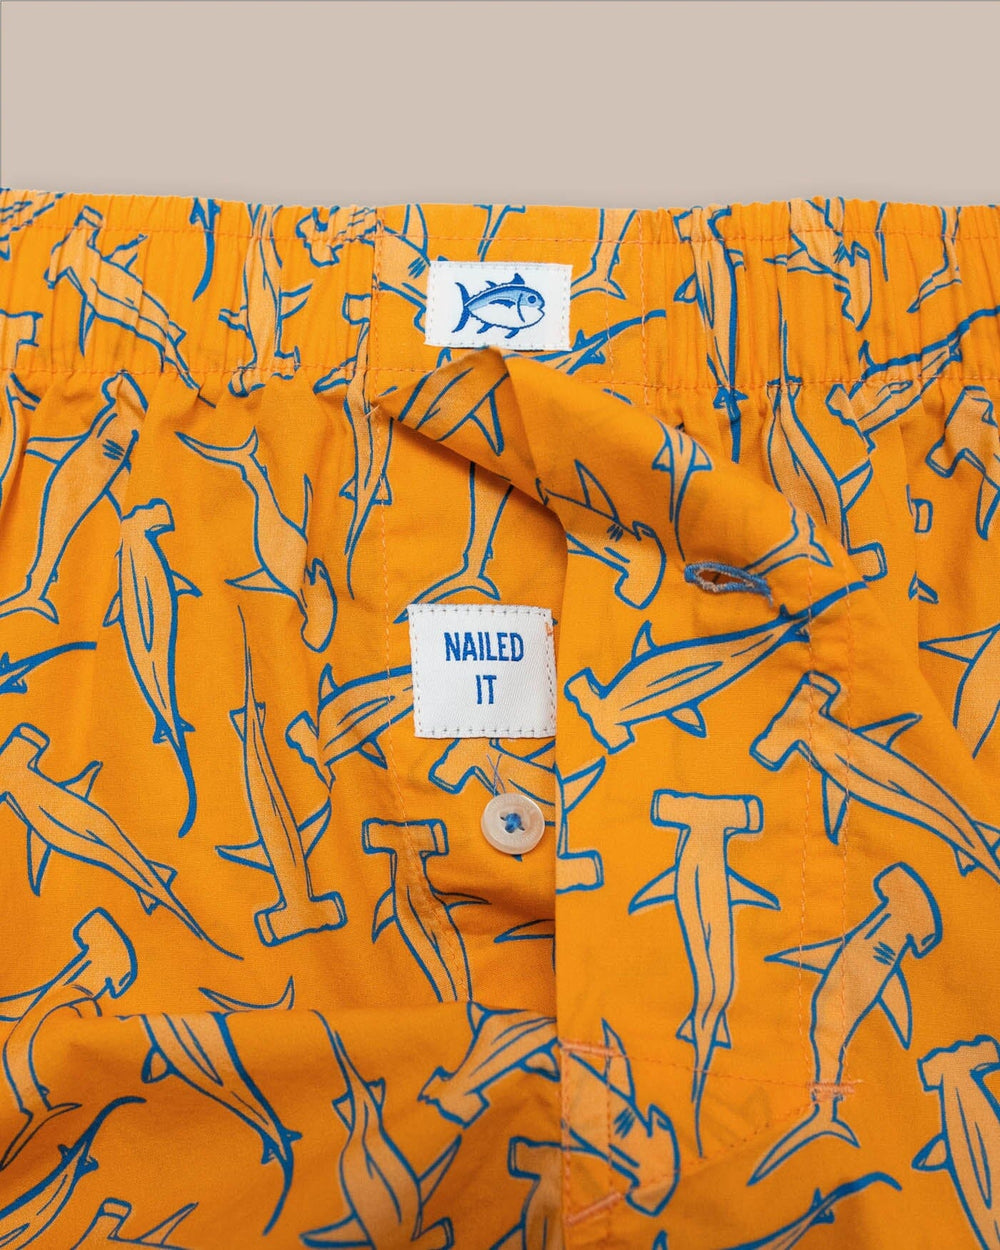 The detail view of the Southern Tide Nailed It Boxer by Southern Tide - Tangerine Orange